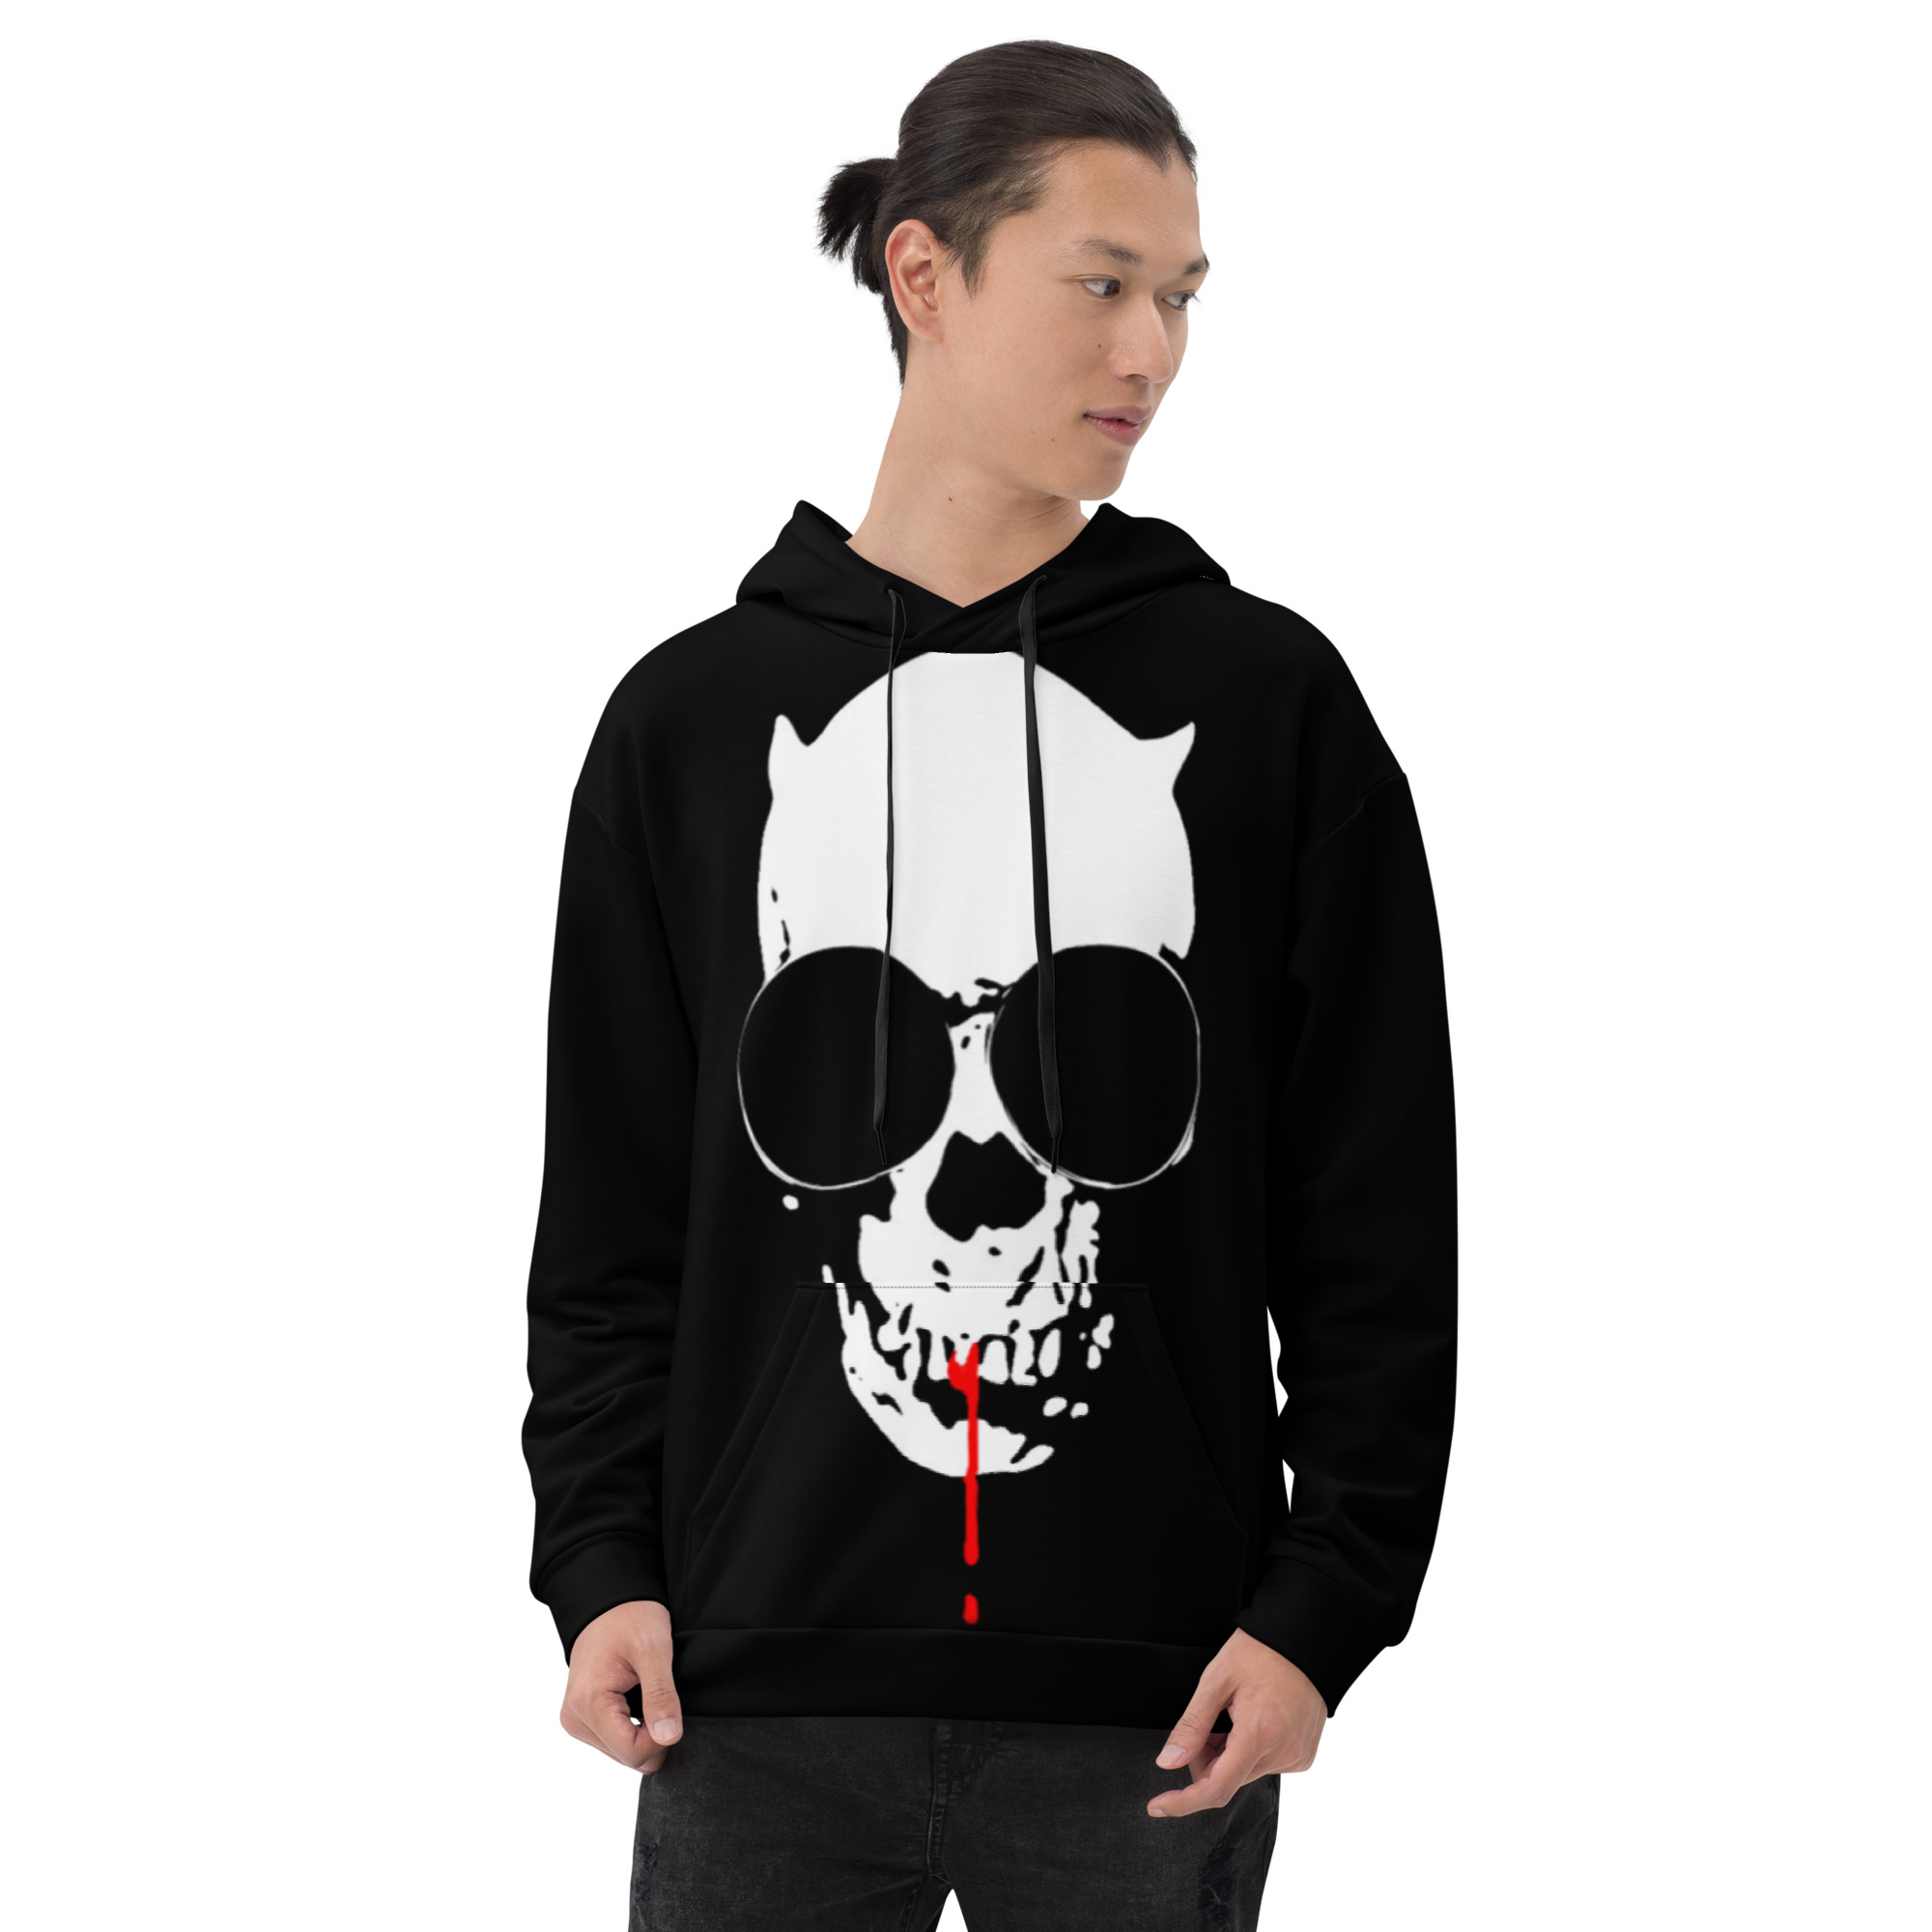 all-over-print-unisex-hoodie-white-front-63cec35bc4b84.jpg